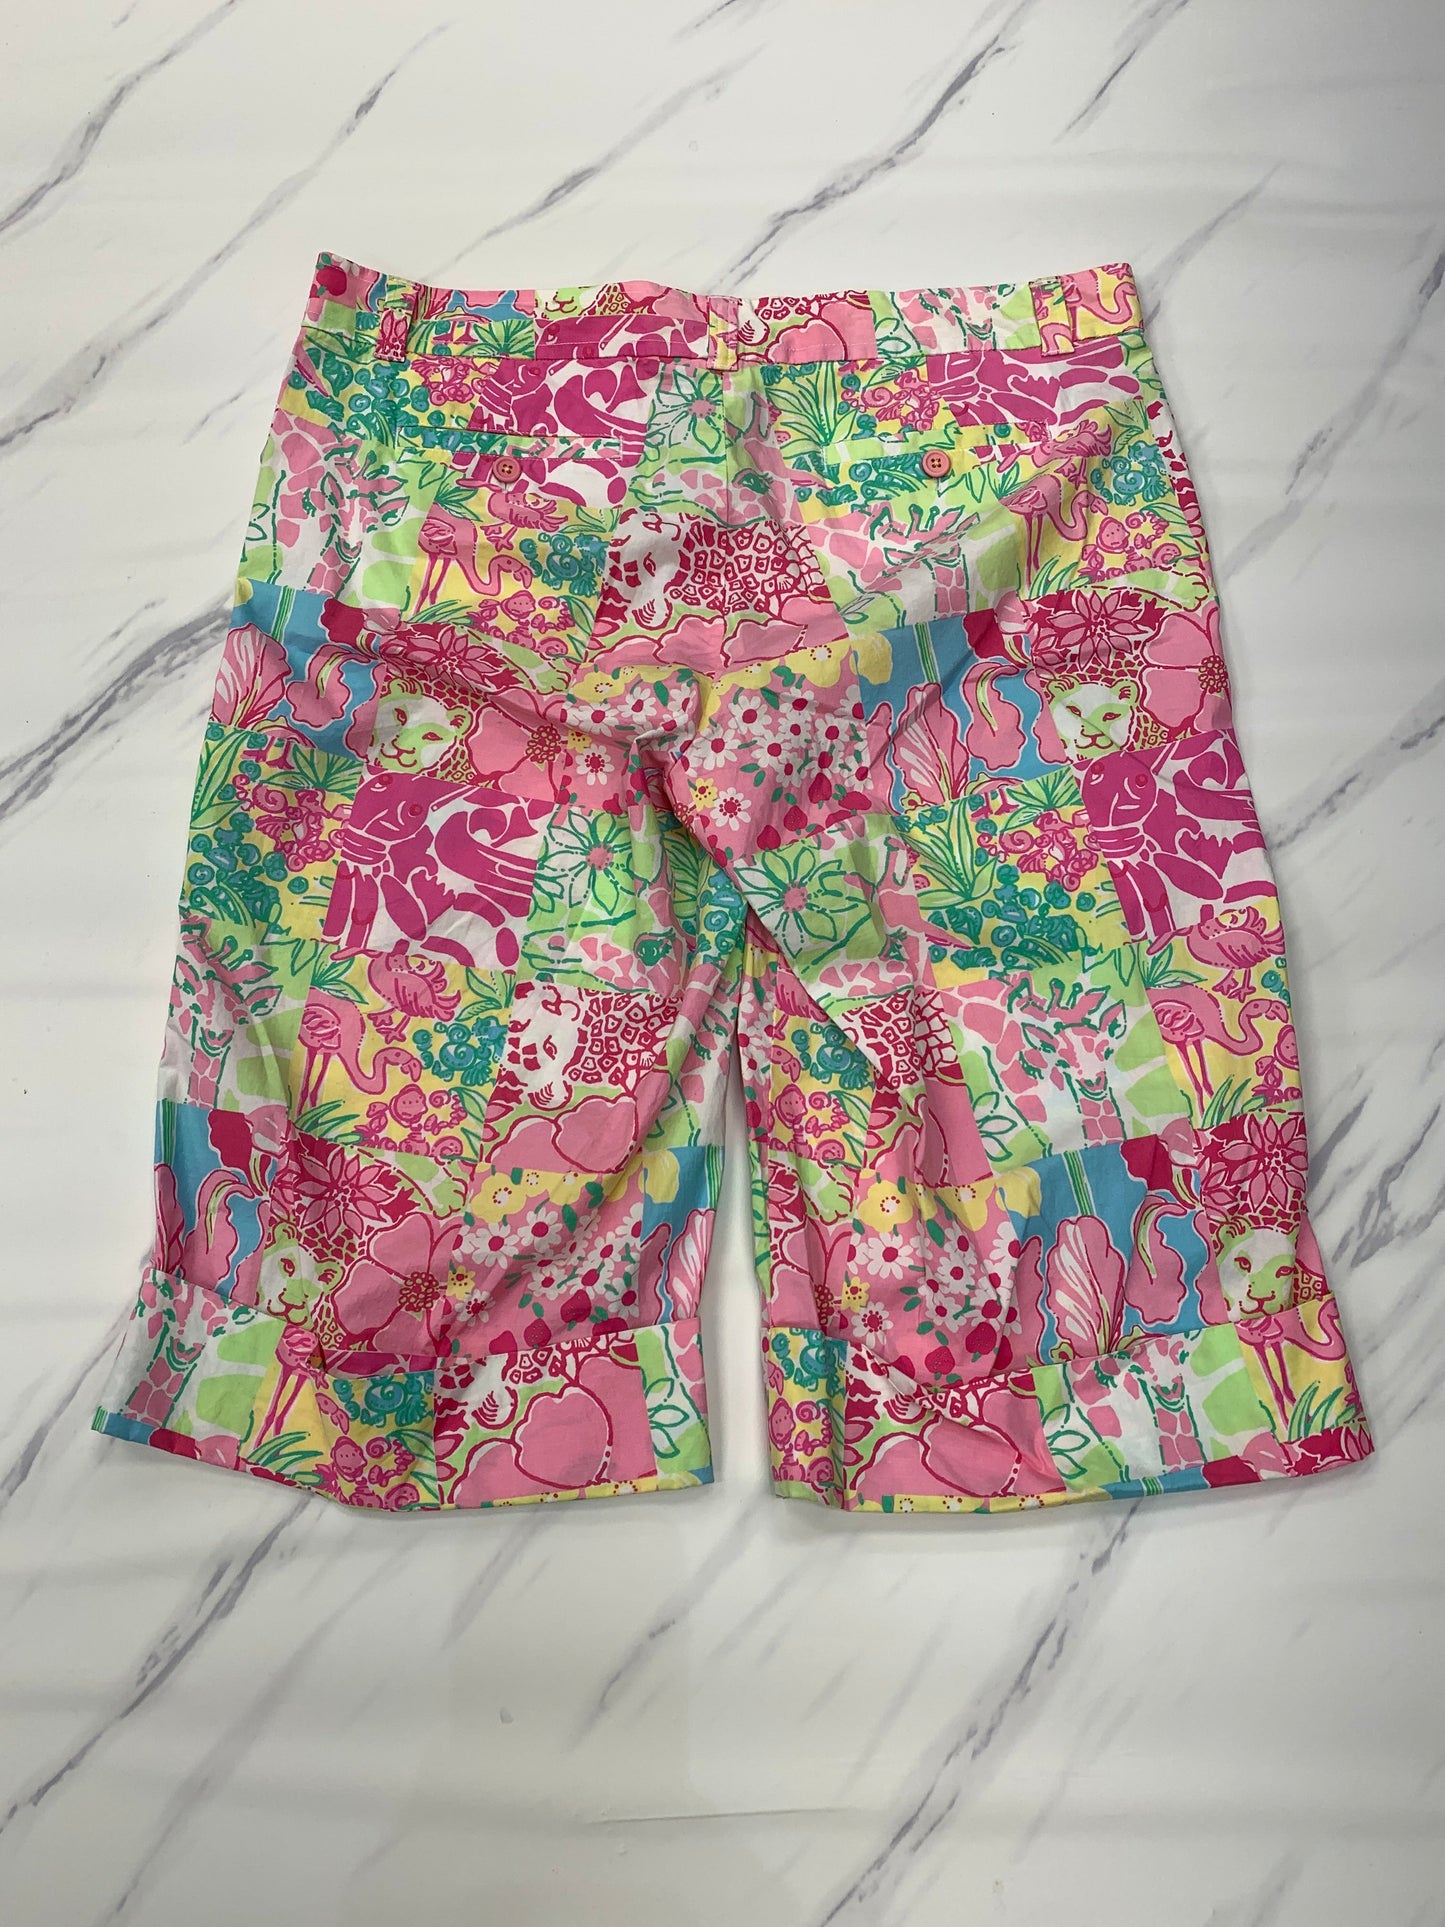 Shorts Lilly Pulitzer, Size 14